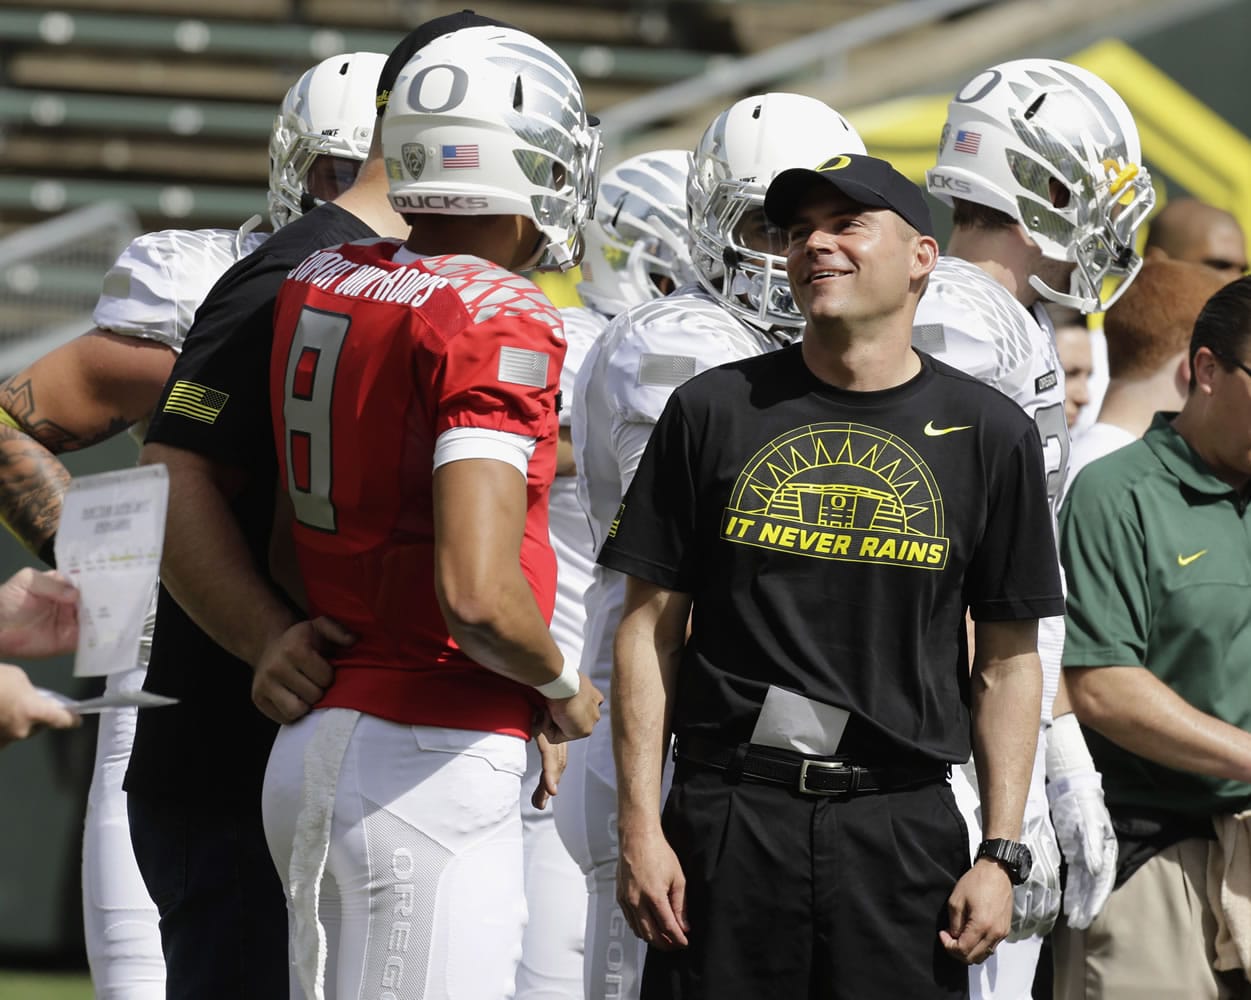 Oregon football coach Mark Helfrich, right, chats with quarterback Marcus Mariota during their spring NCAA college football game in Eugene, Ore. Helfrich has talked to predecessor Chip Kelly a bunch of times since Kelly bolted to the NFL. Kelly's advice? &quot;Be yourself,&quot; Helfrich said. &quot;If I can be known as the guy who kept winning after Chip Kelly, I'm good with that.&quot; The Ducks seemed primed to do so.